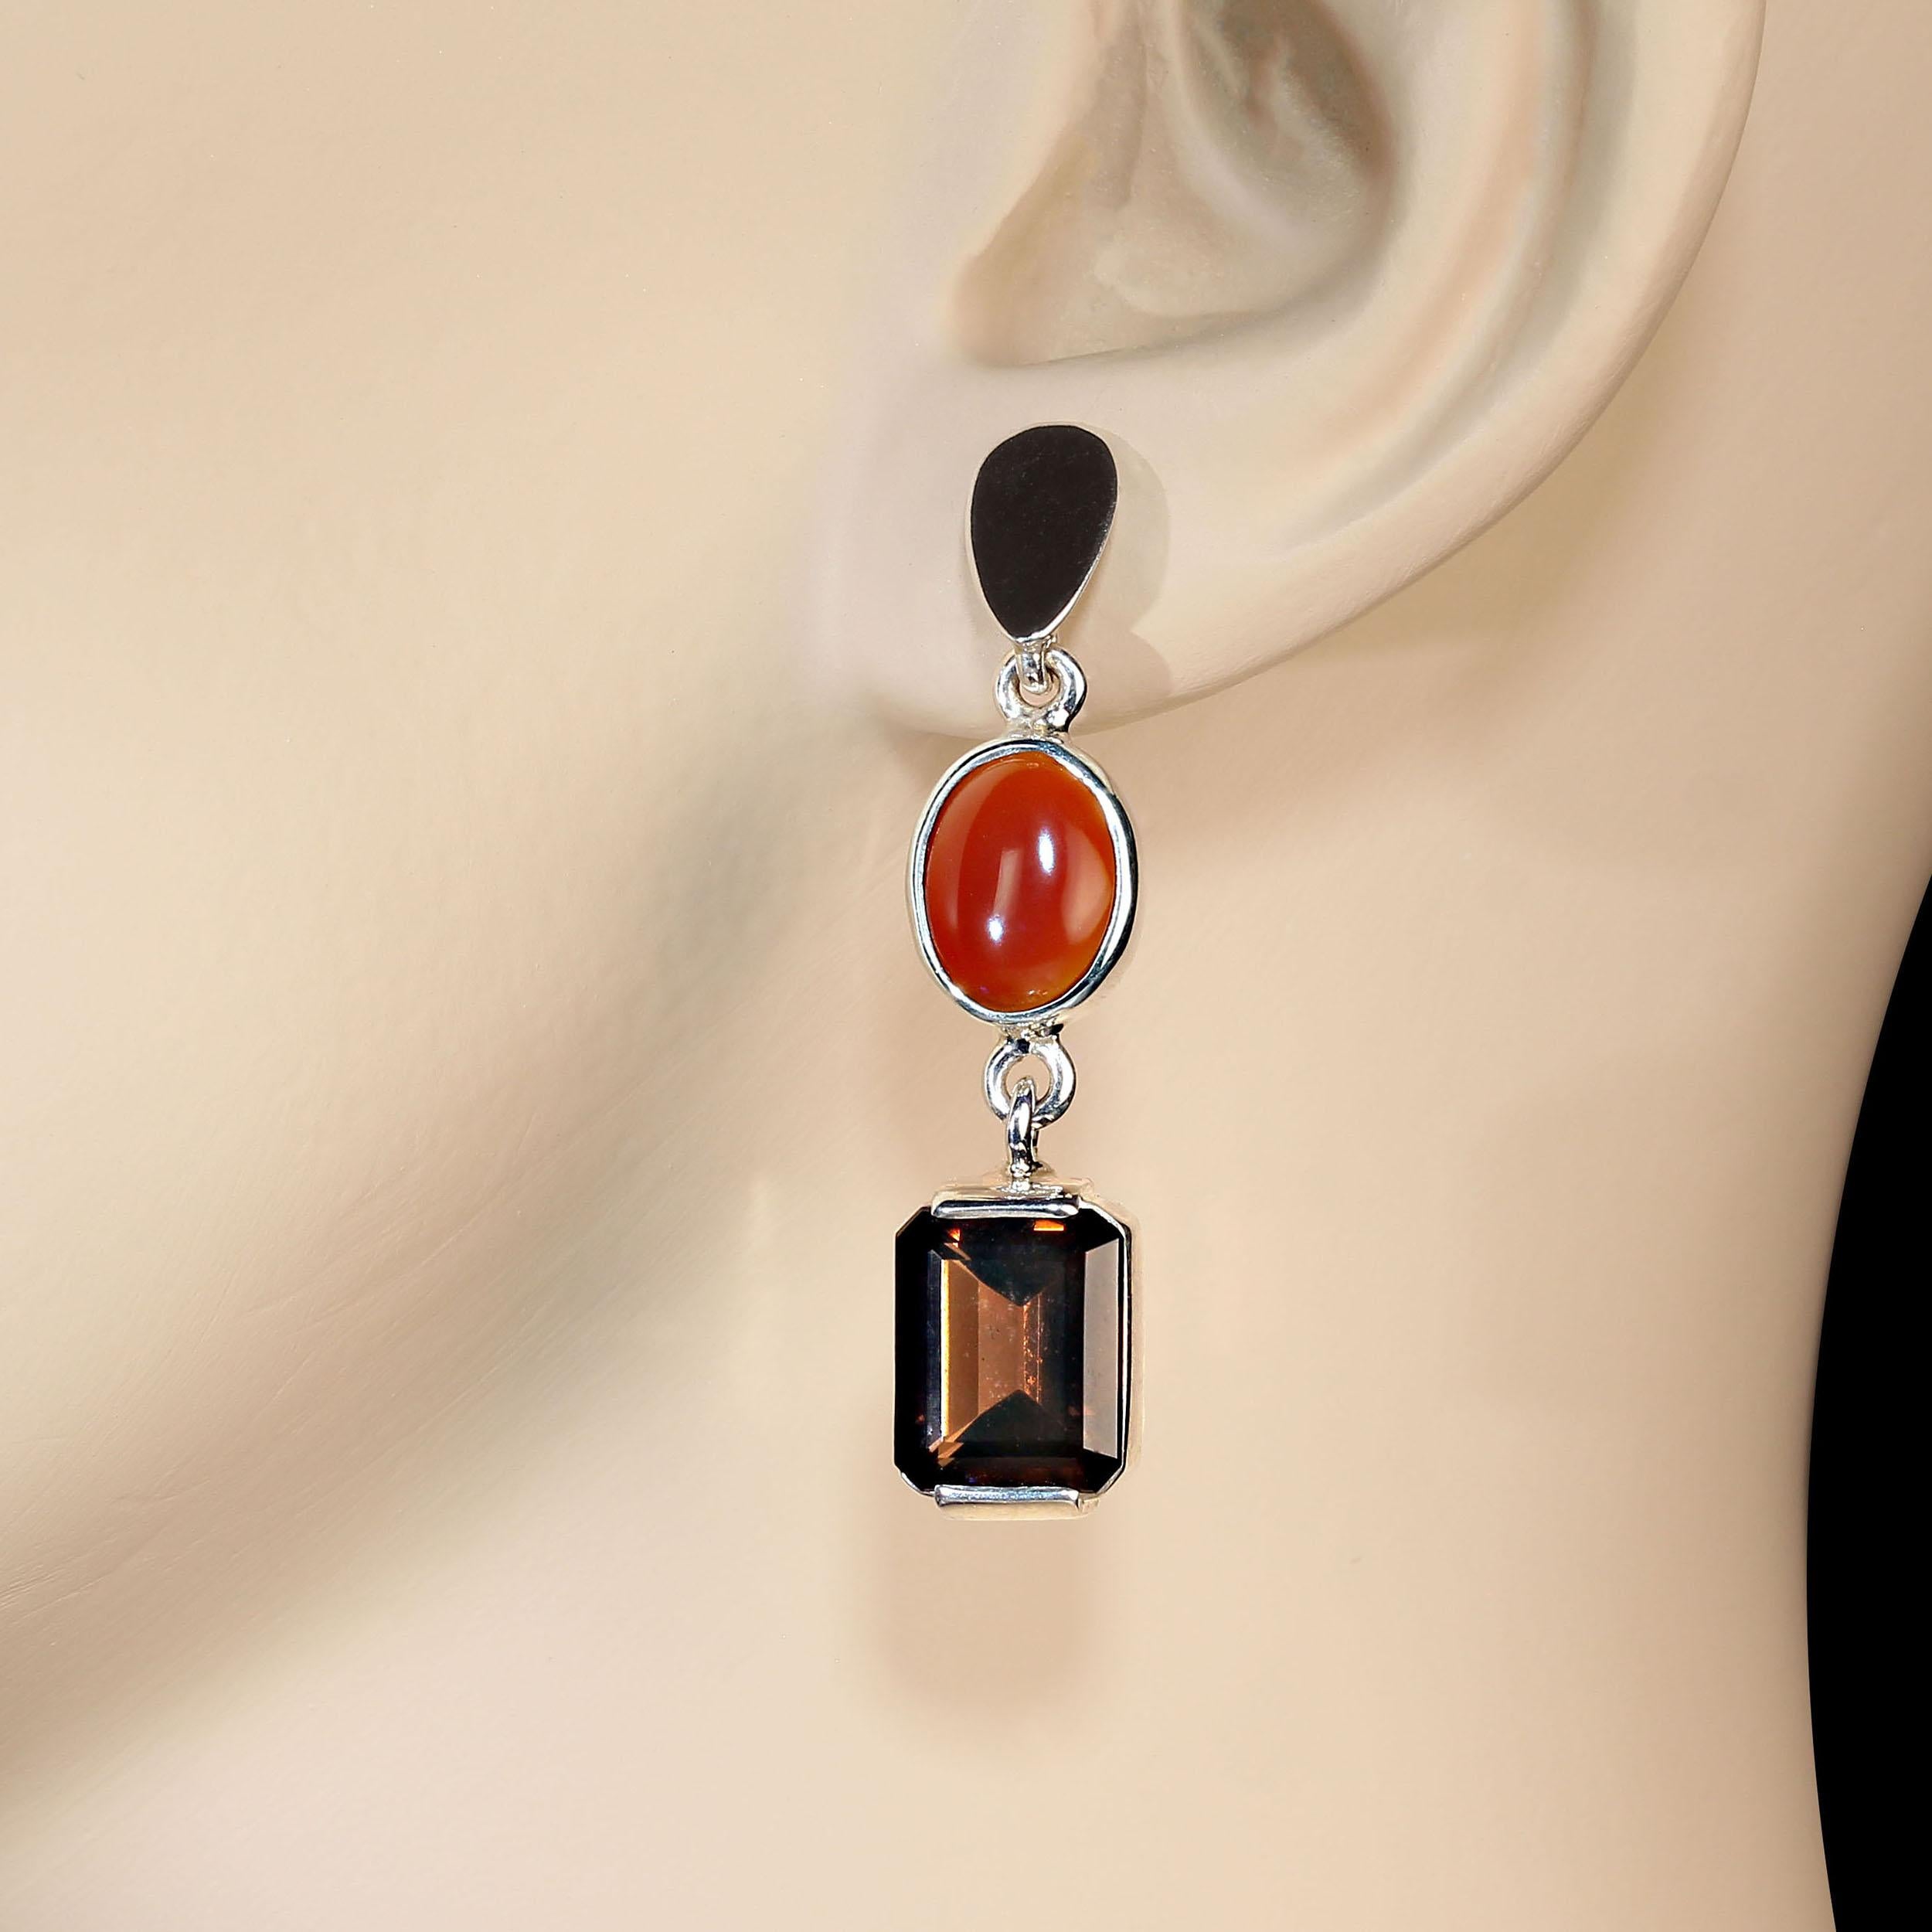 Elegant dangle earrings of sparkling orange Carnelian and warm Smoky Quartz. These lovley gemstones come straight from one of our favorite vendors in the heart of Brazil.  They hang 1.5 inches in length and have a post and butterfly back.  The